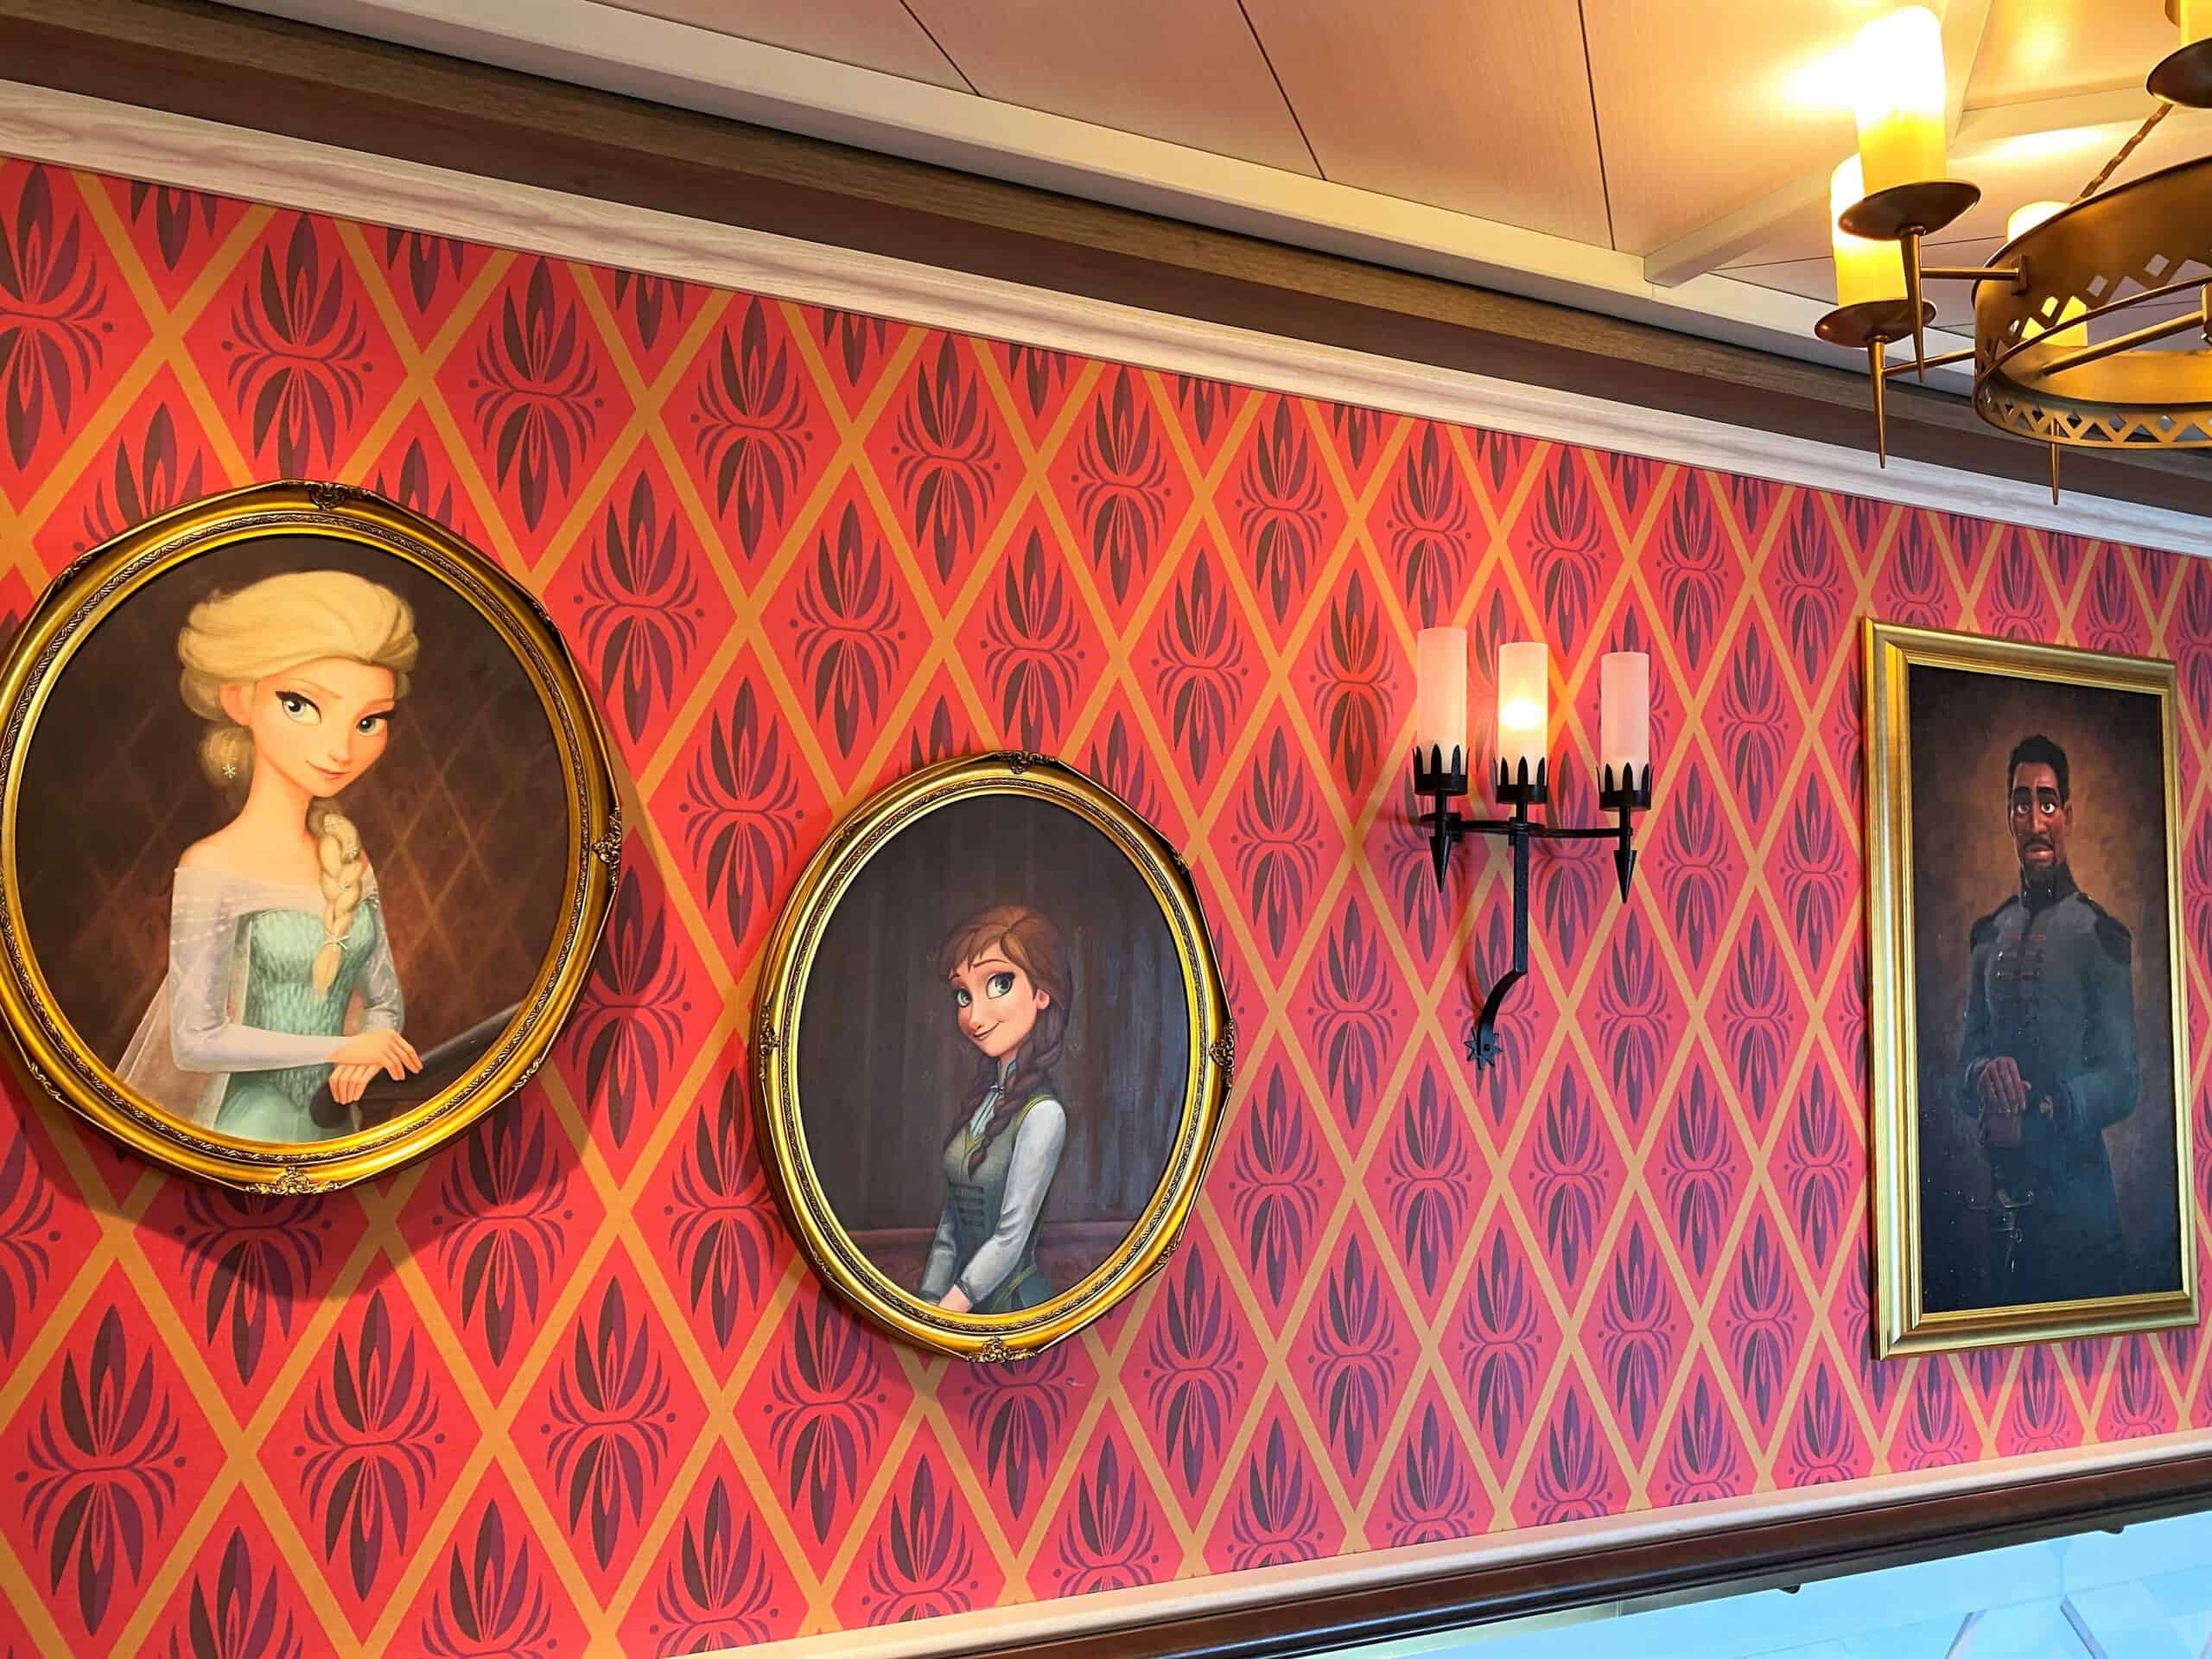 Anna and Elsa Portraits and Decor at Disney Wish Frozen Dining Adventure